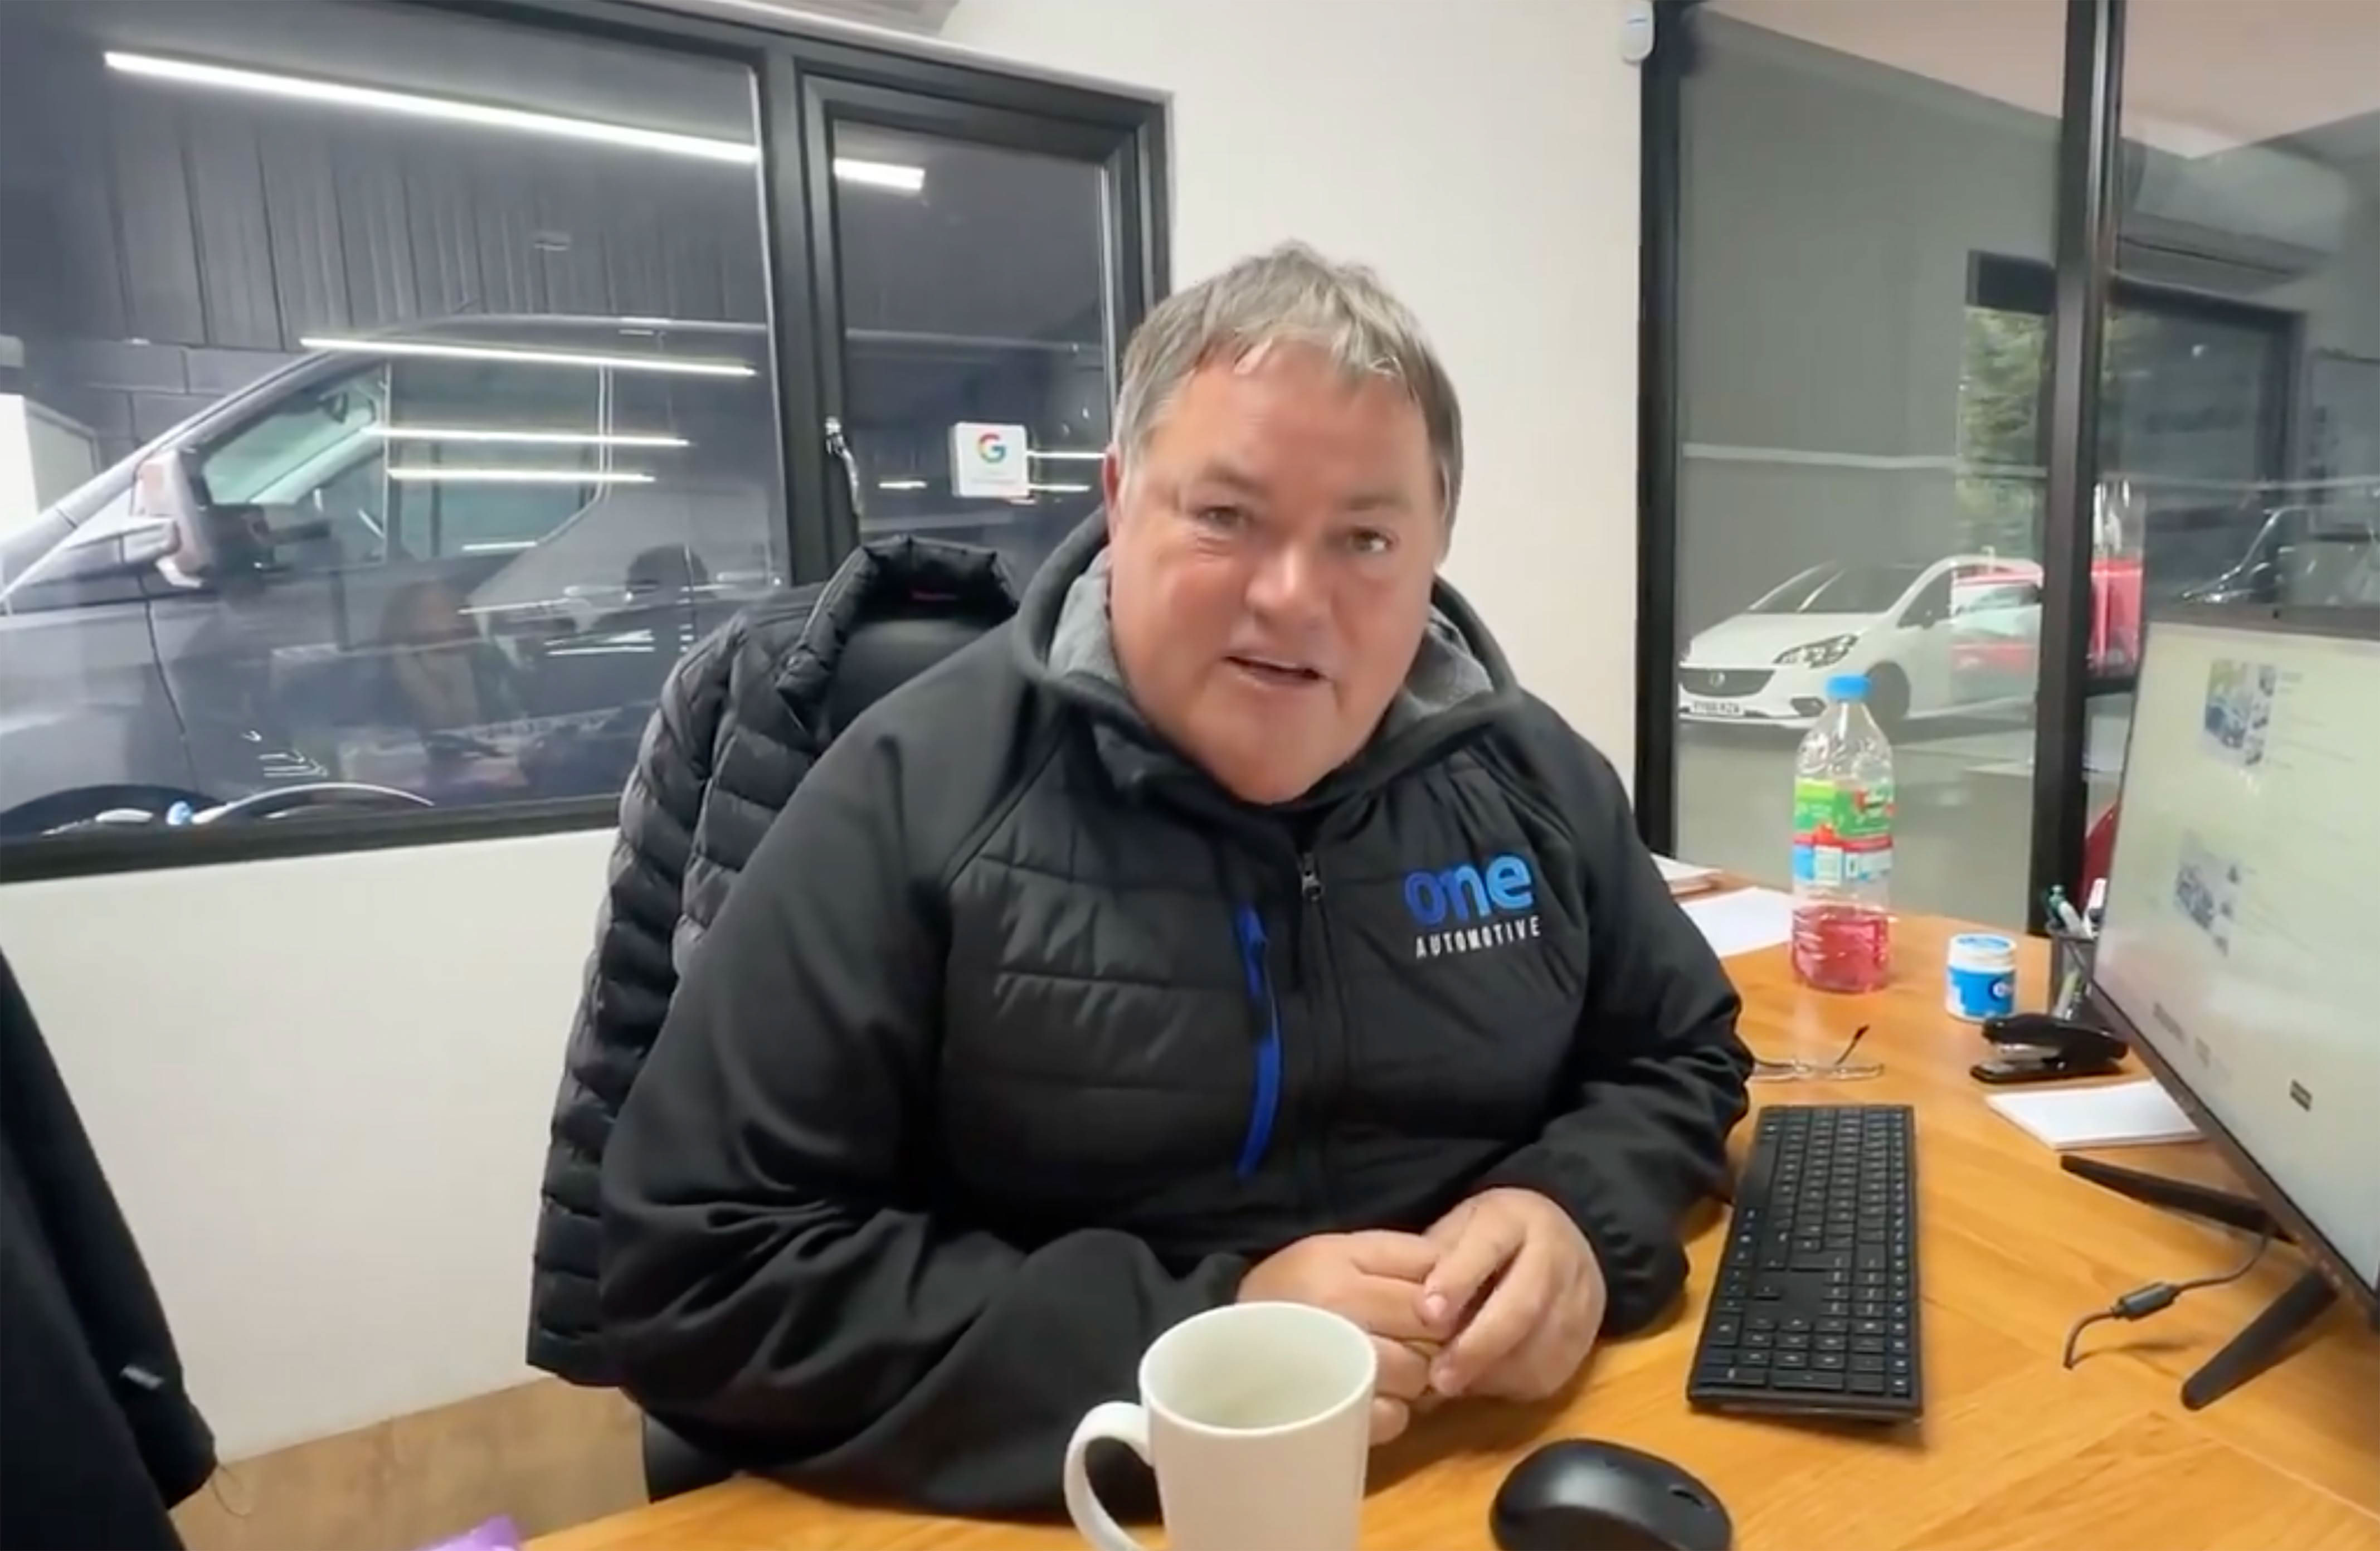 Wheeler Dealers' Mike Brewer took to social media to share his experience